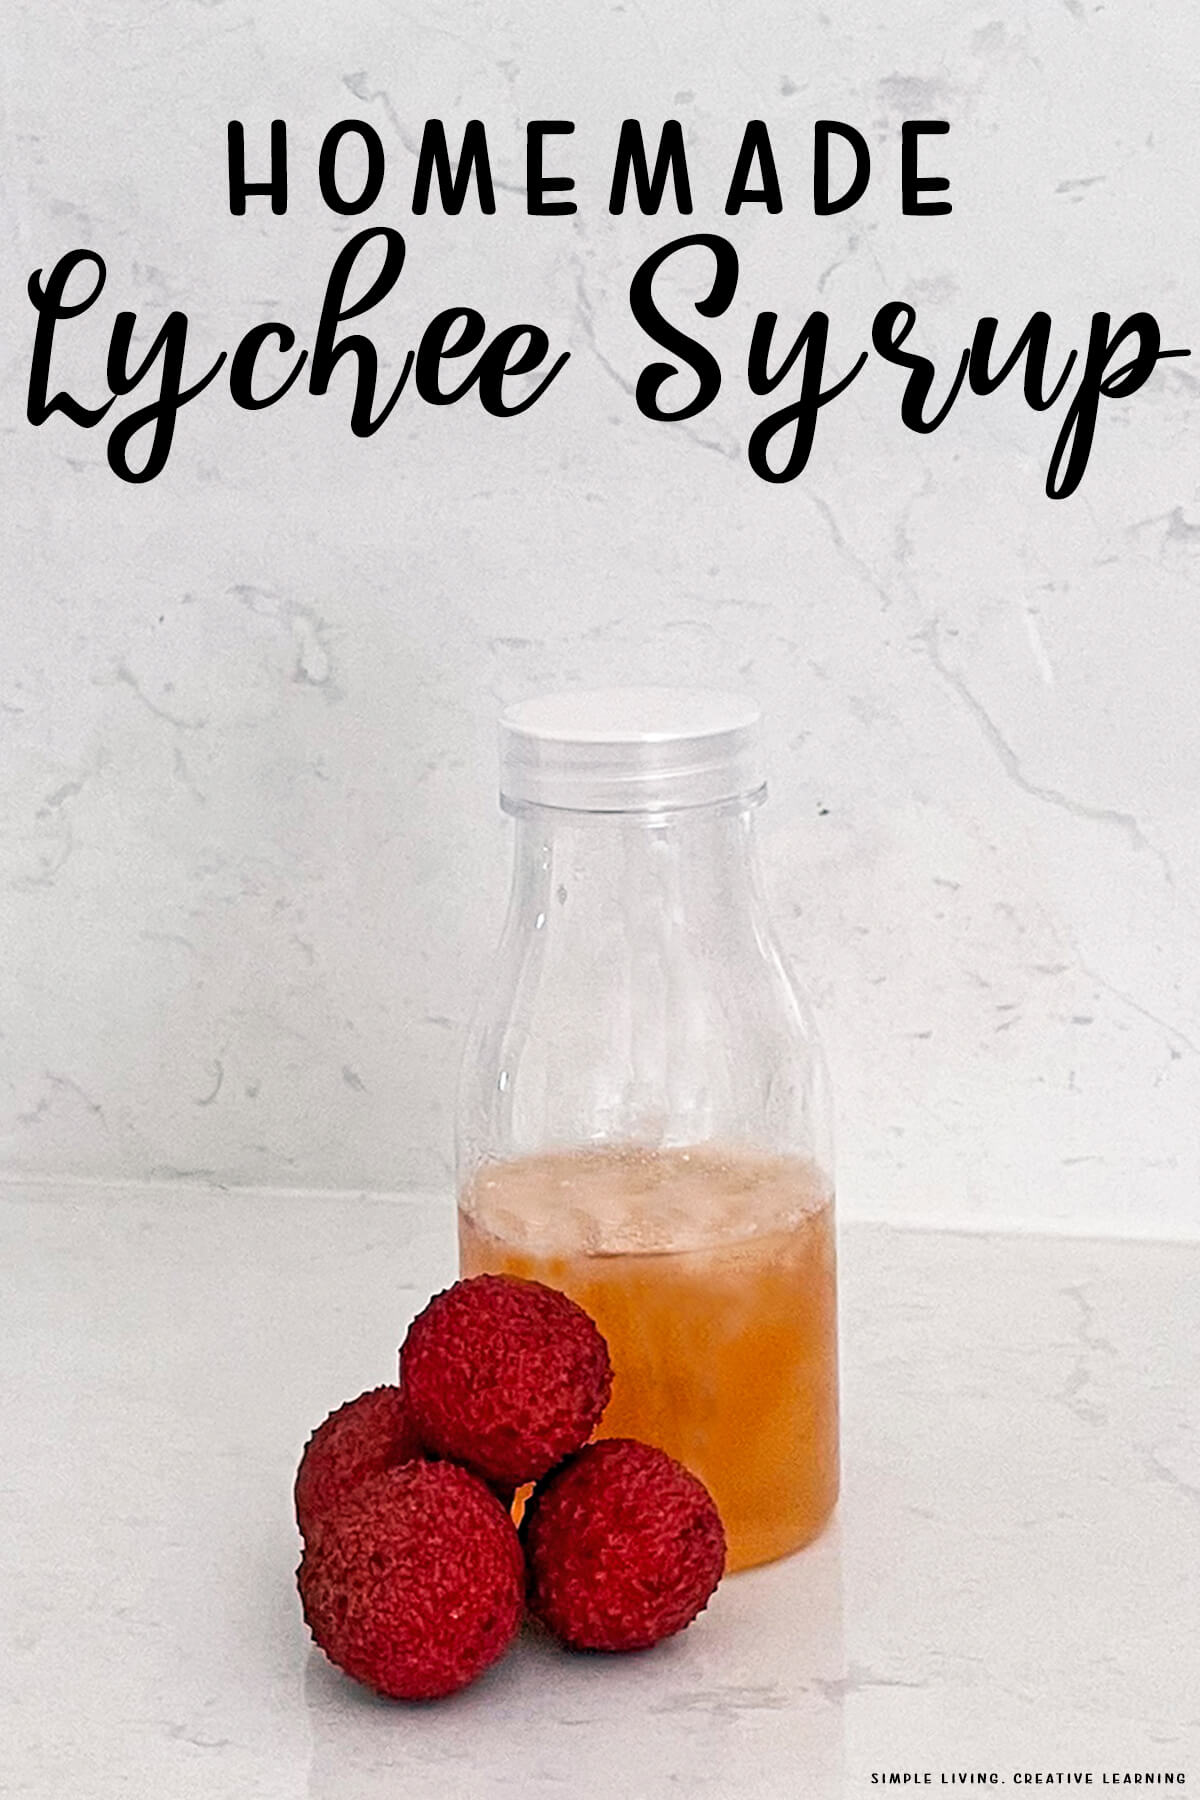 Homemade Lychee Syrup